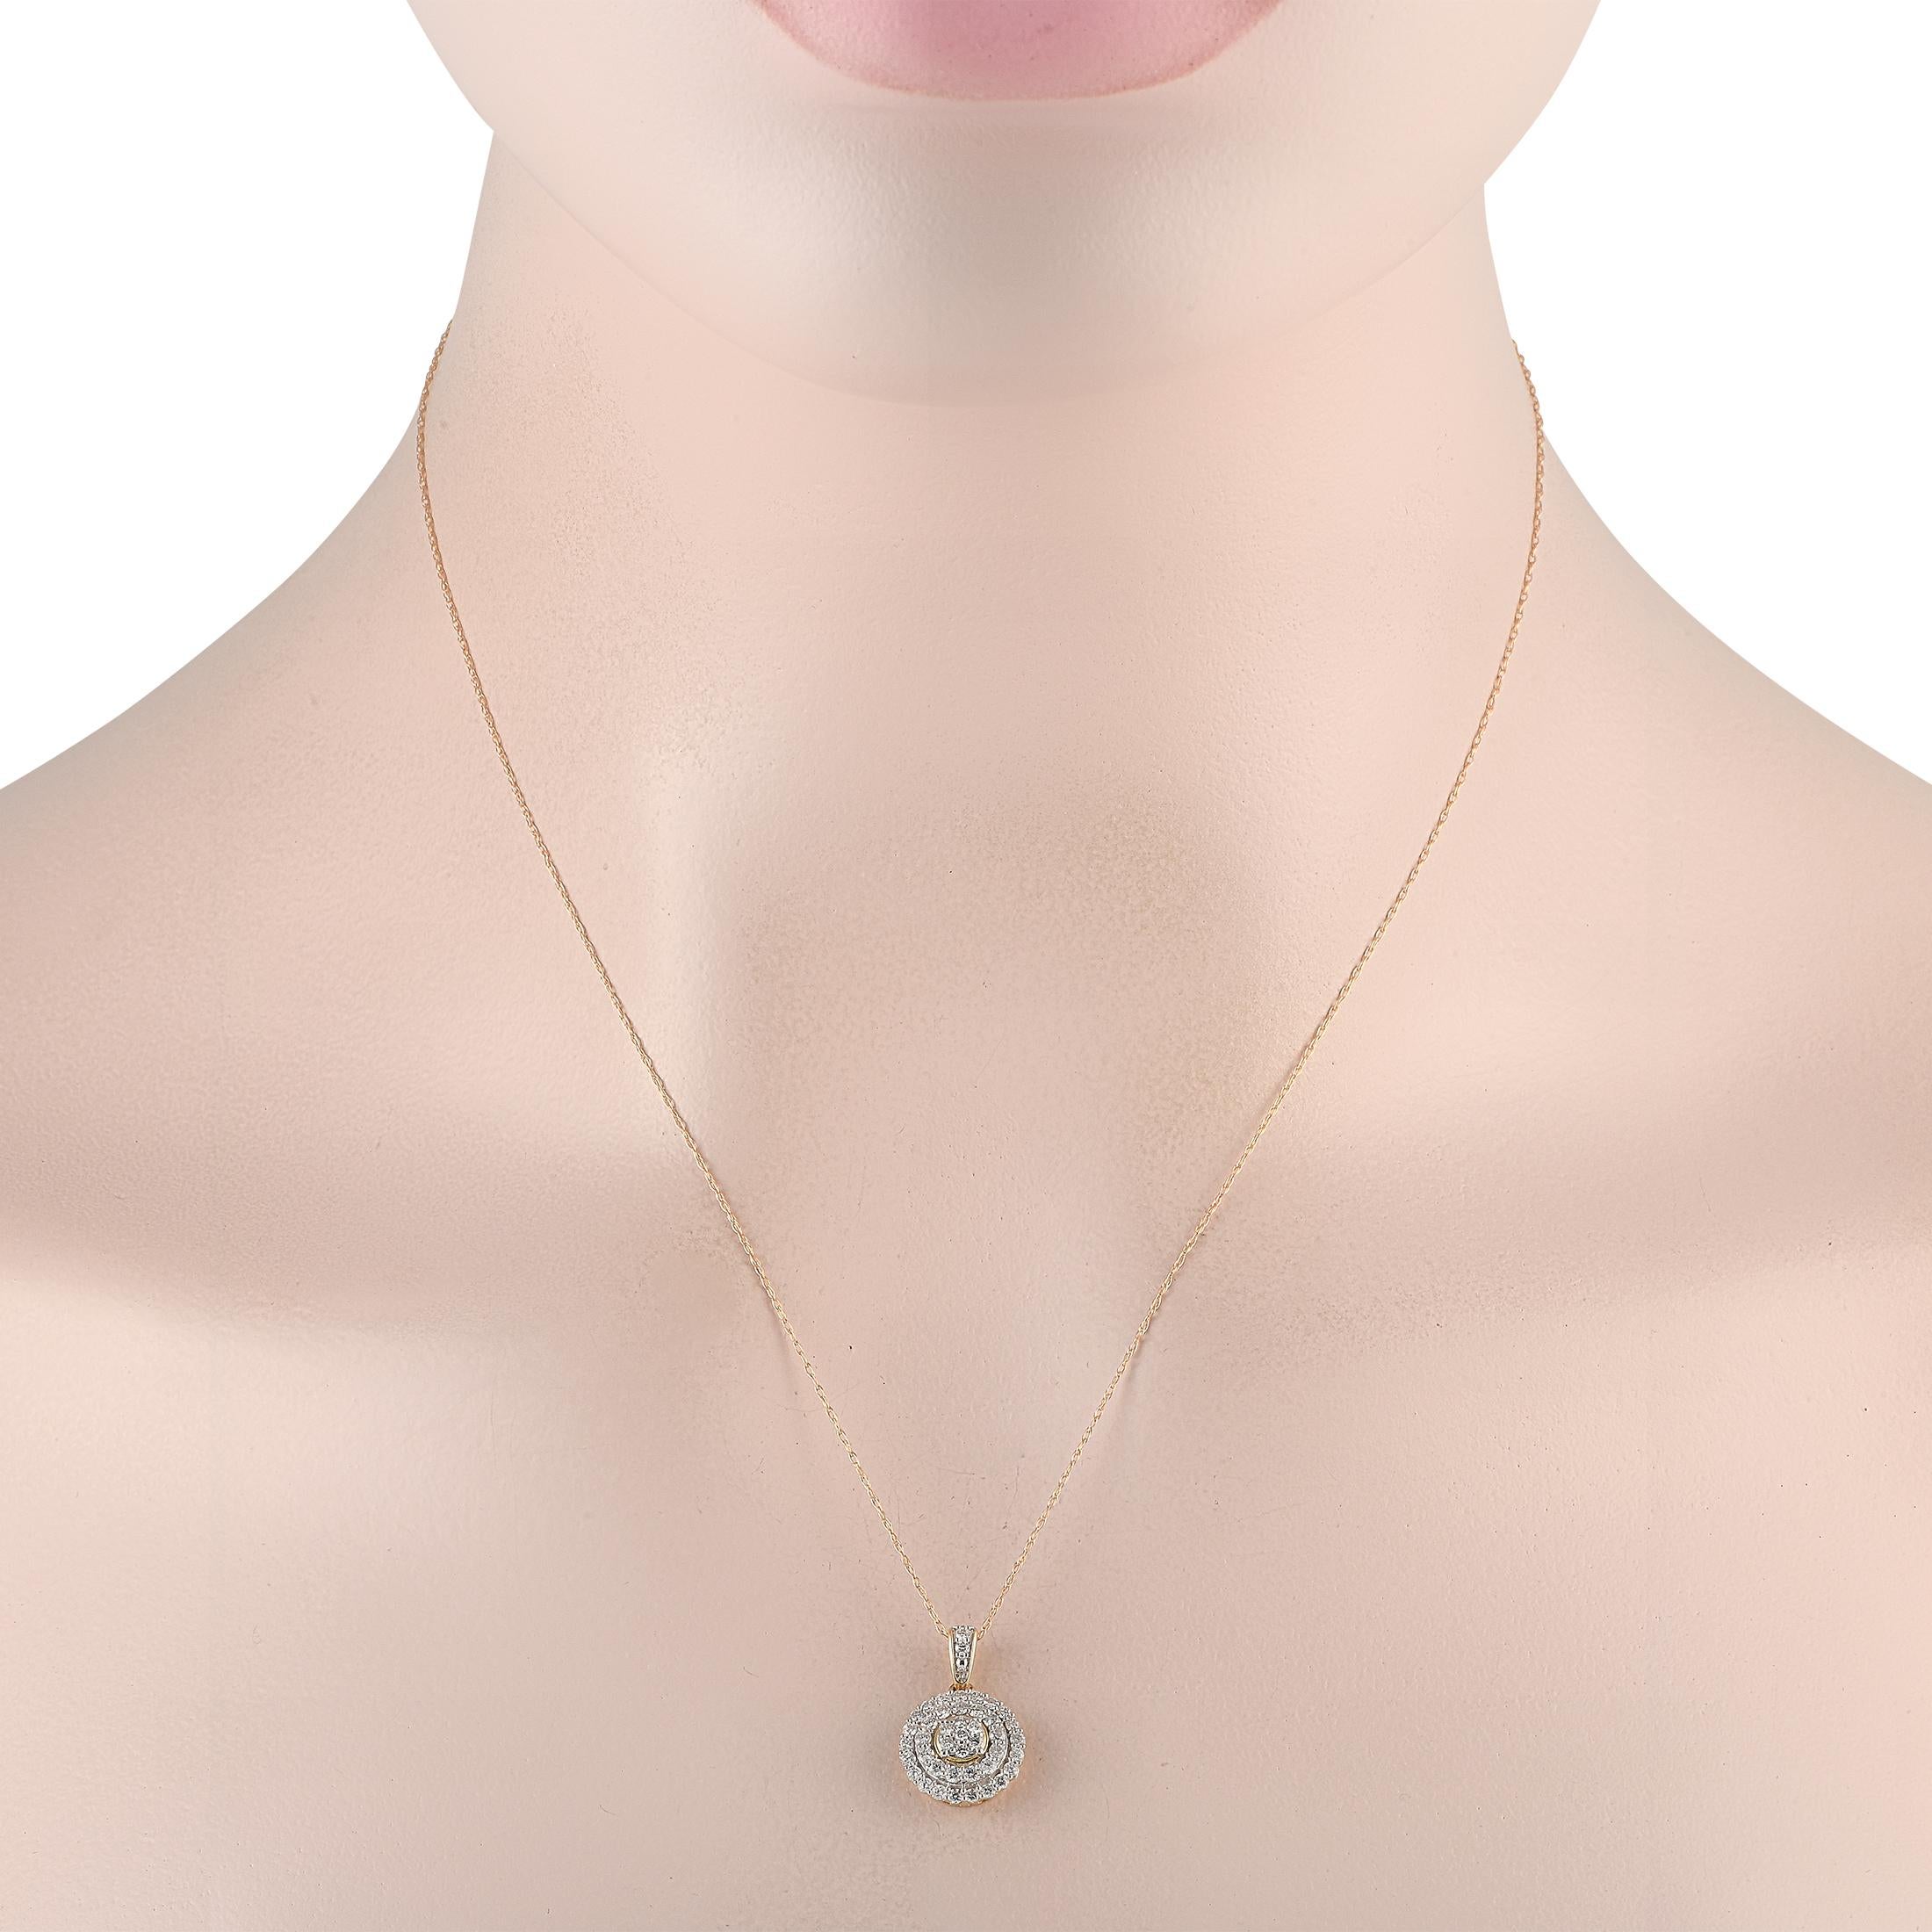 Quickly dress up a casual sweater or a jeans-and-tee outfit with the subtle elegance of this diamond necklace. It has a thin chain with a spring ring clasp, and a disc pendant. The round pendant has its center filled with a cluster of diamonds. Two